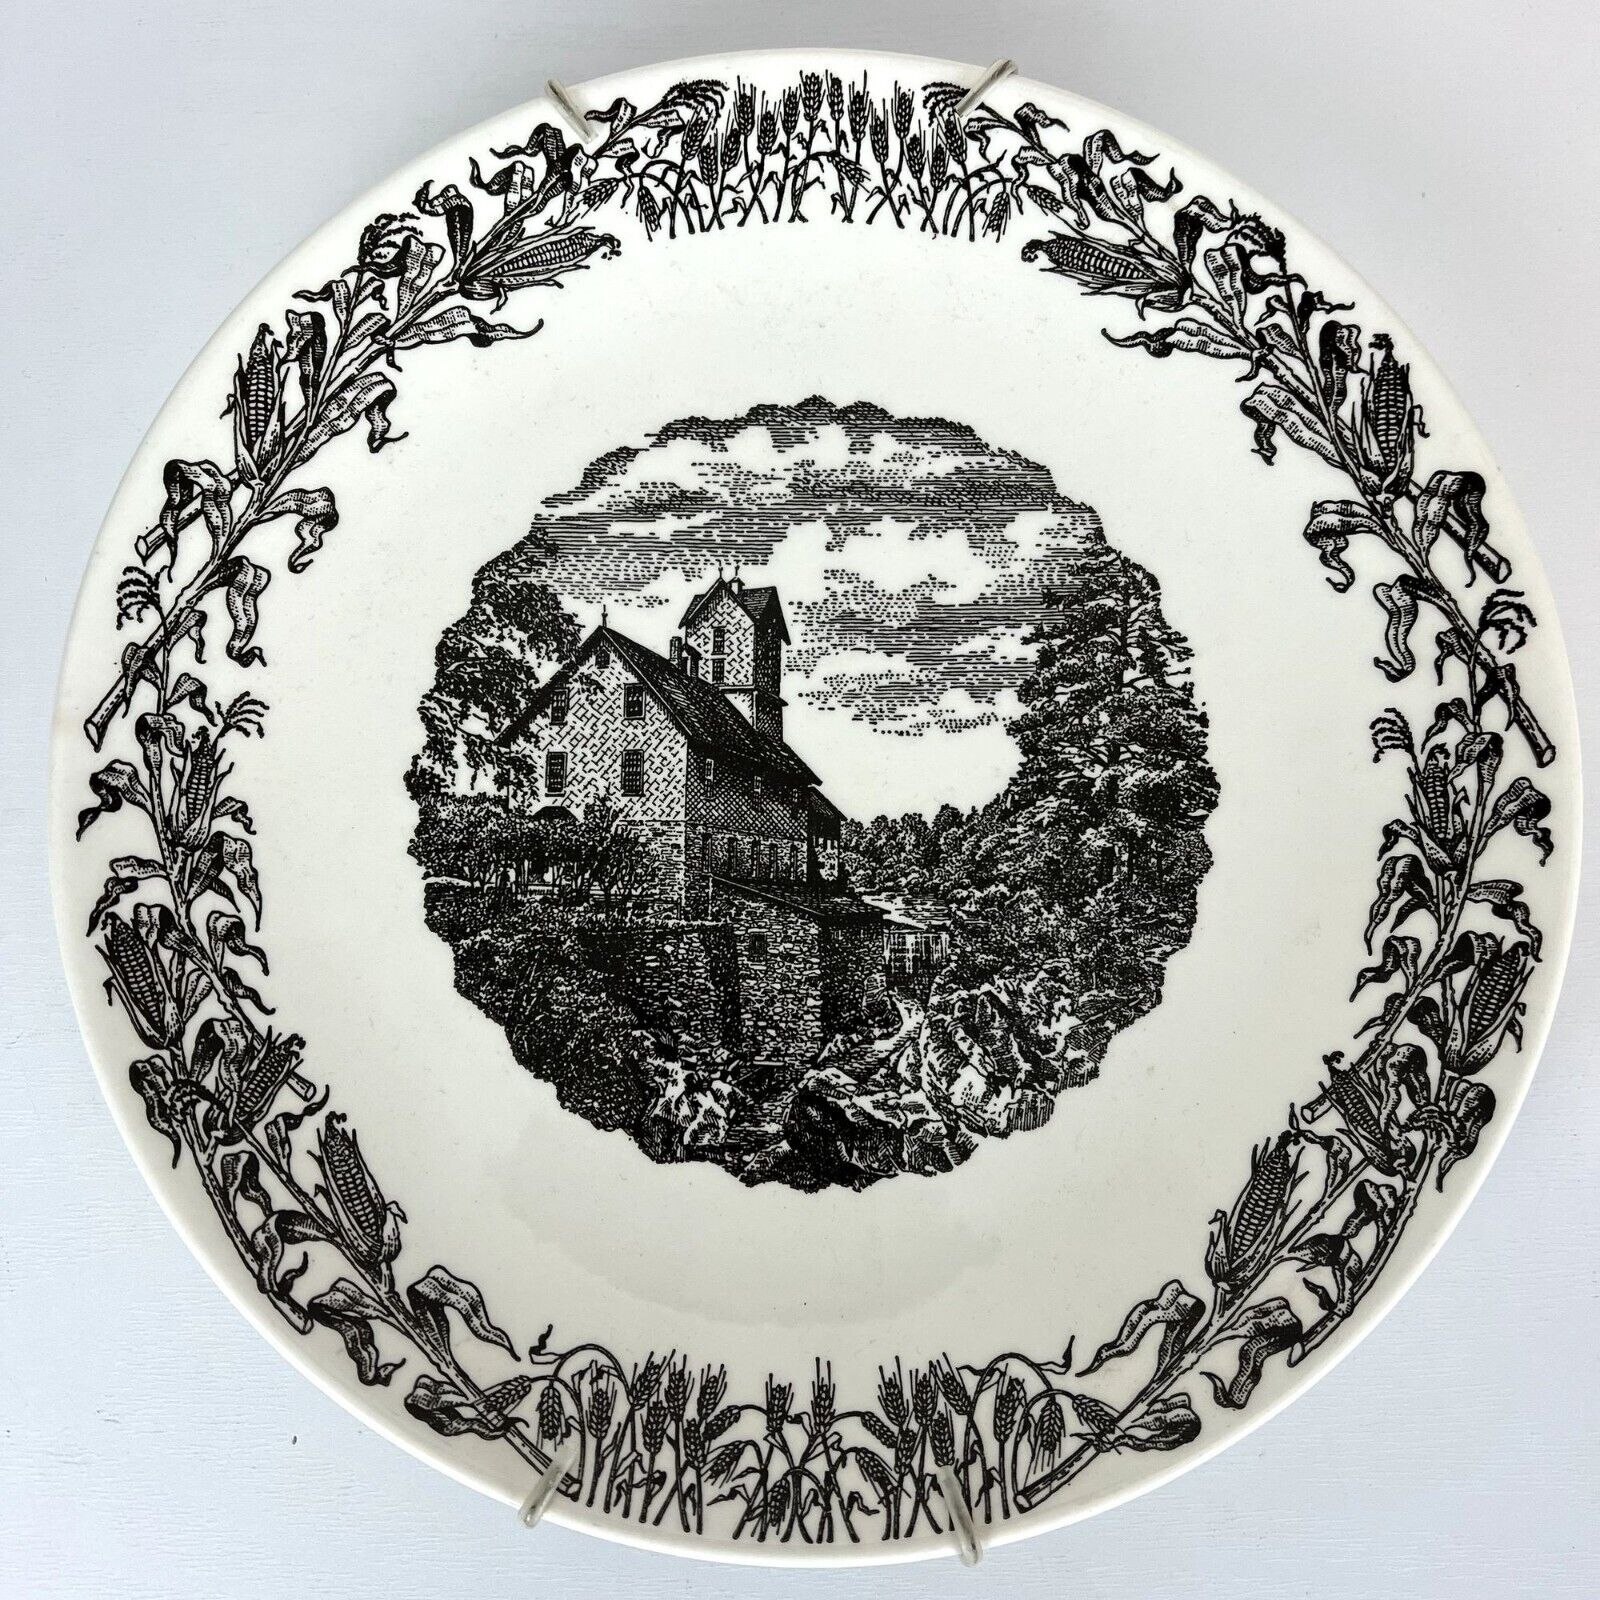 Vintage Chittenden Mill Collectible Decorative Plate Jericho, Vermont 1763-1963